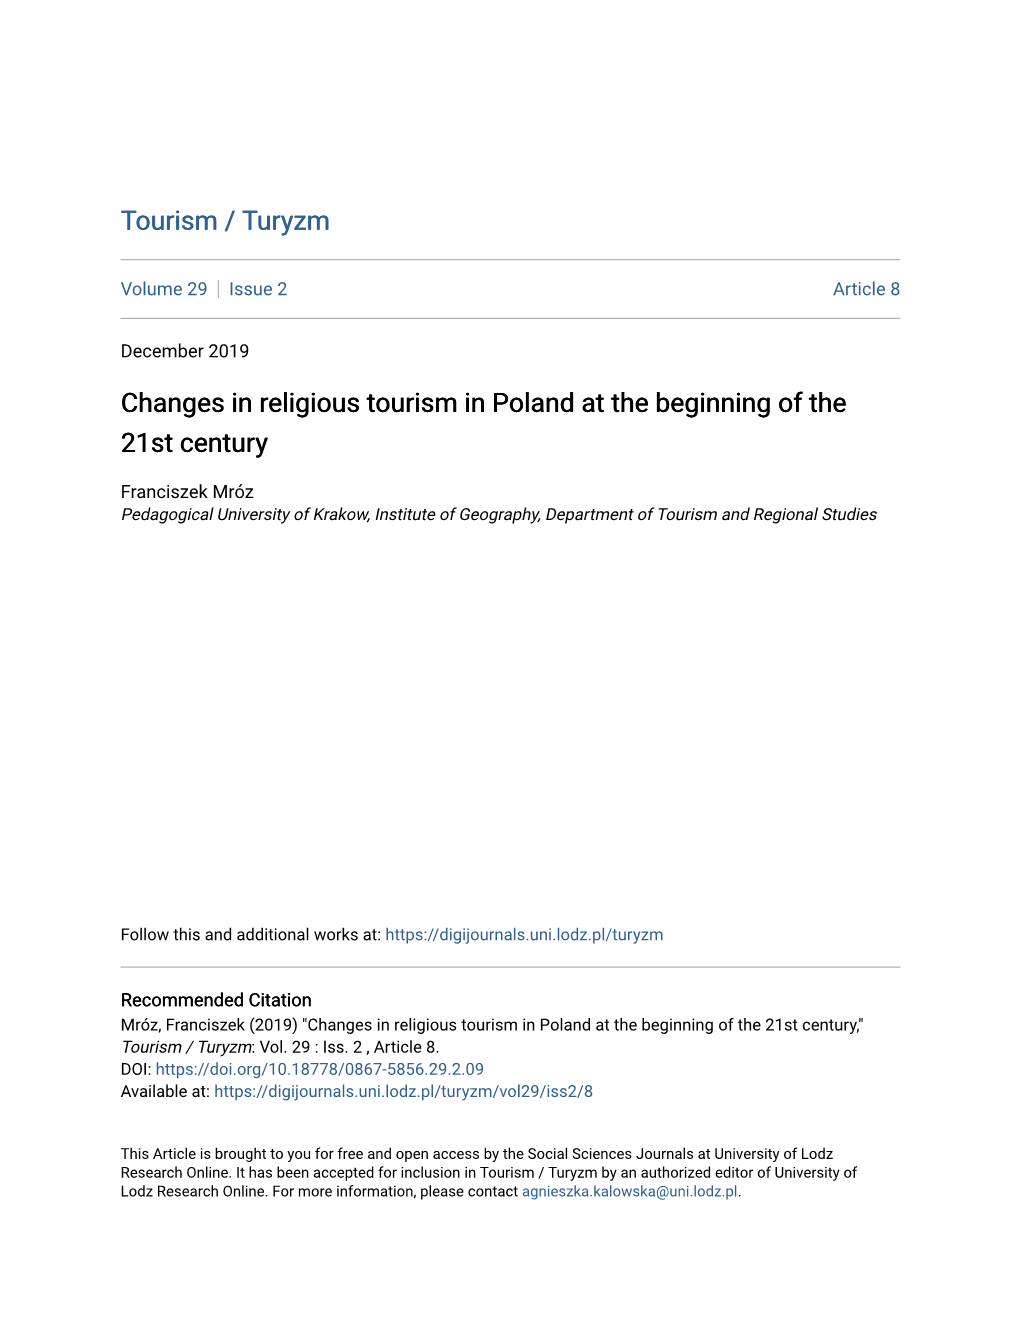 Changes in Religious Tourism in Poland at the Beginning of the 21St Century